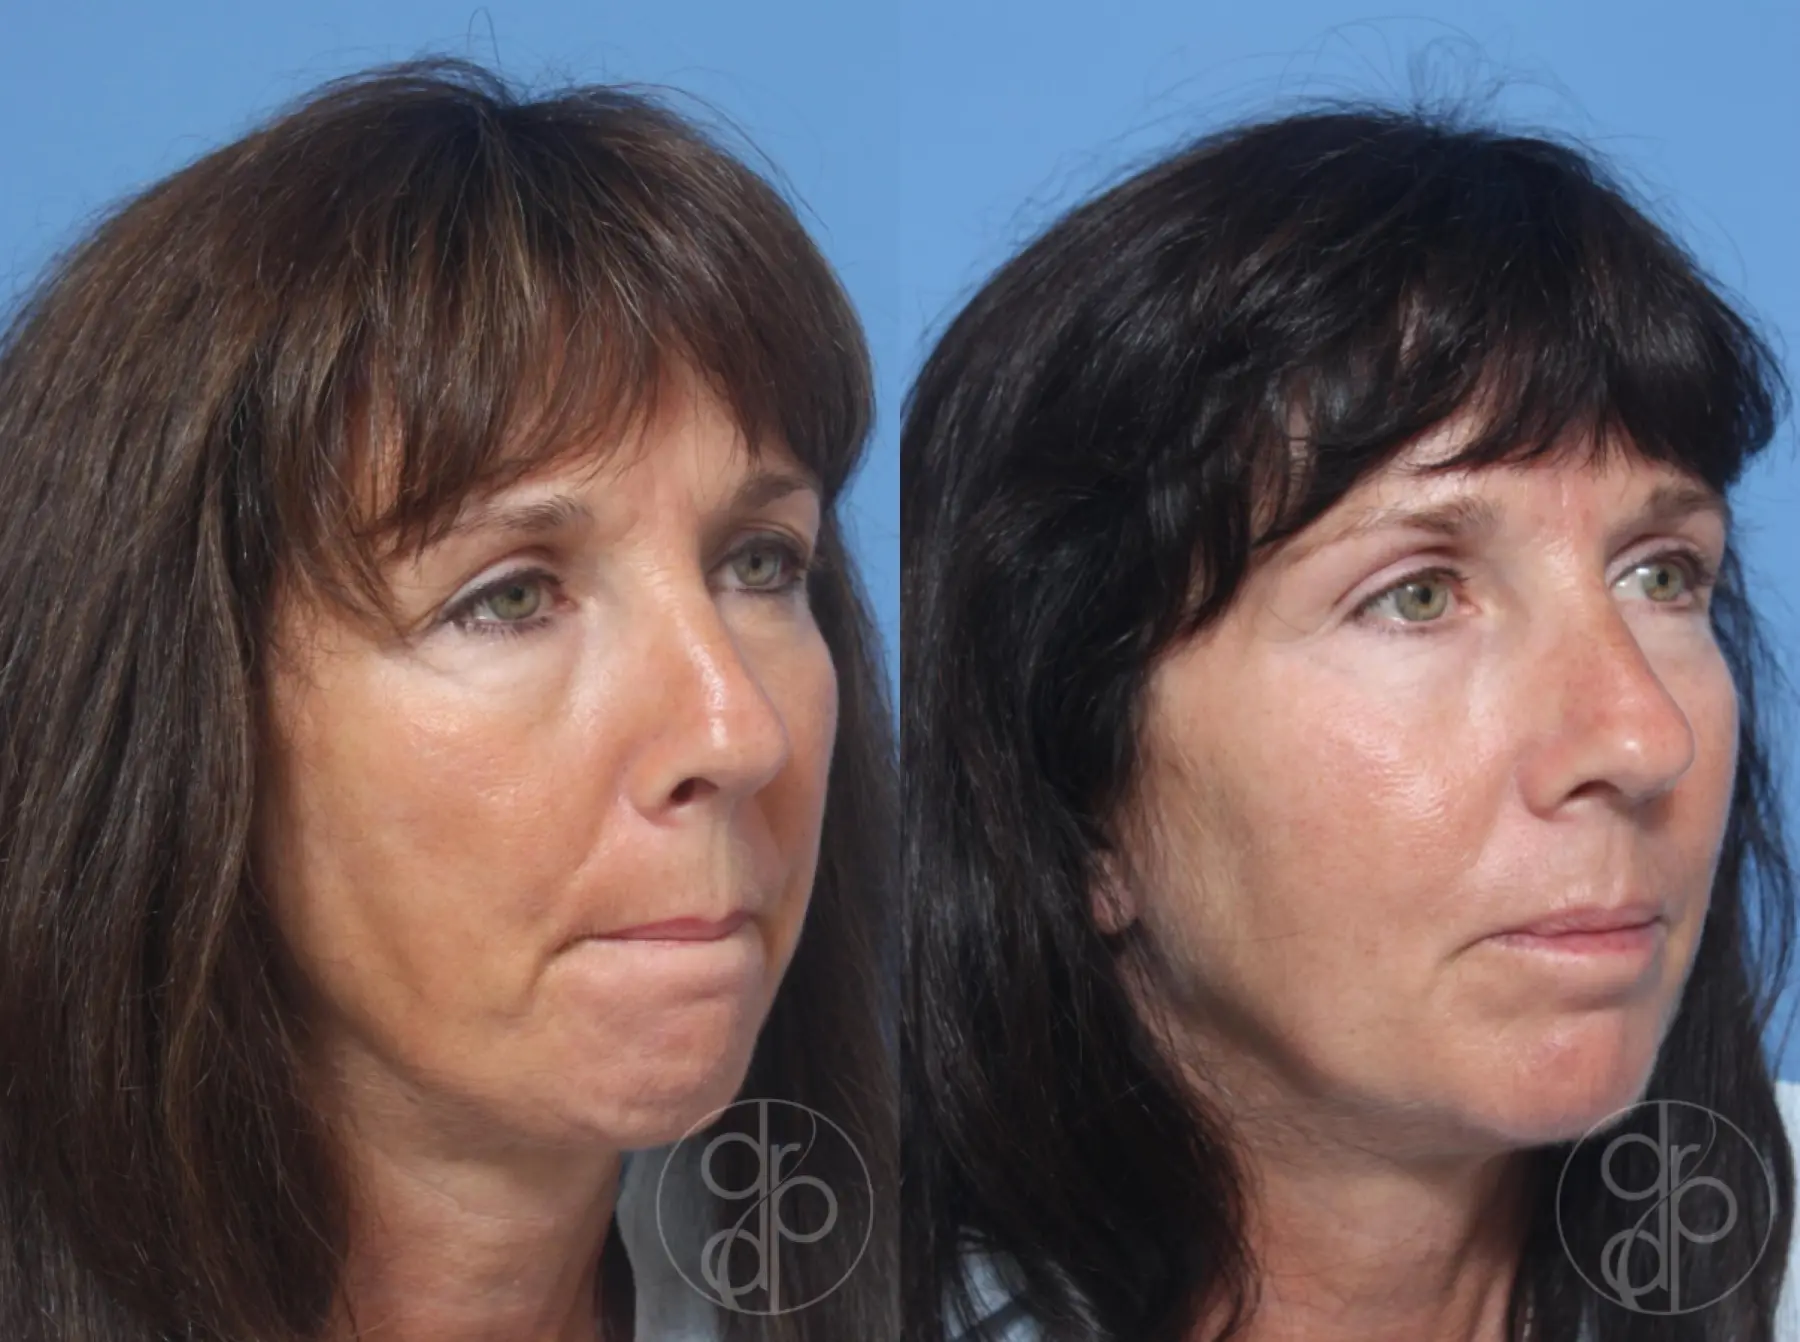 patient 11904 blepharoplasty before and after result - Before and After 2